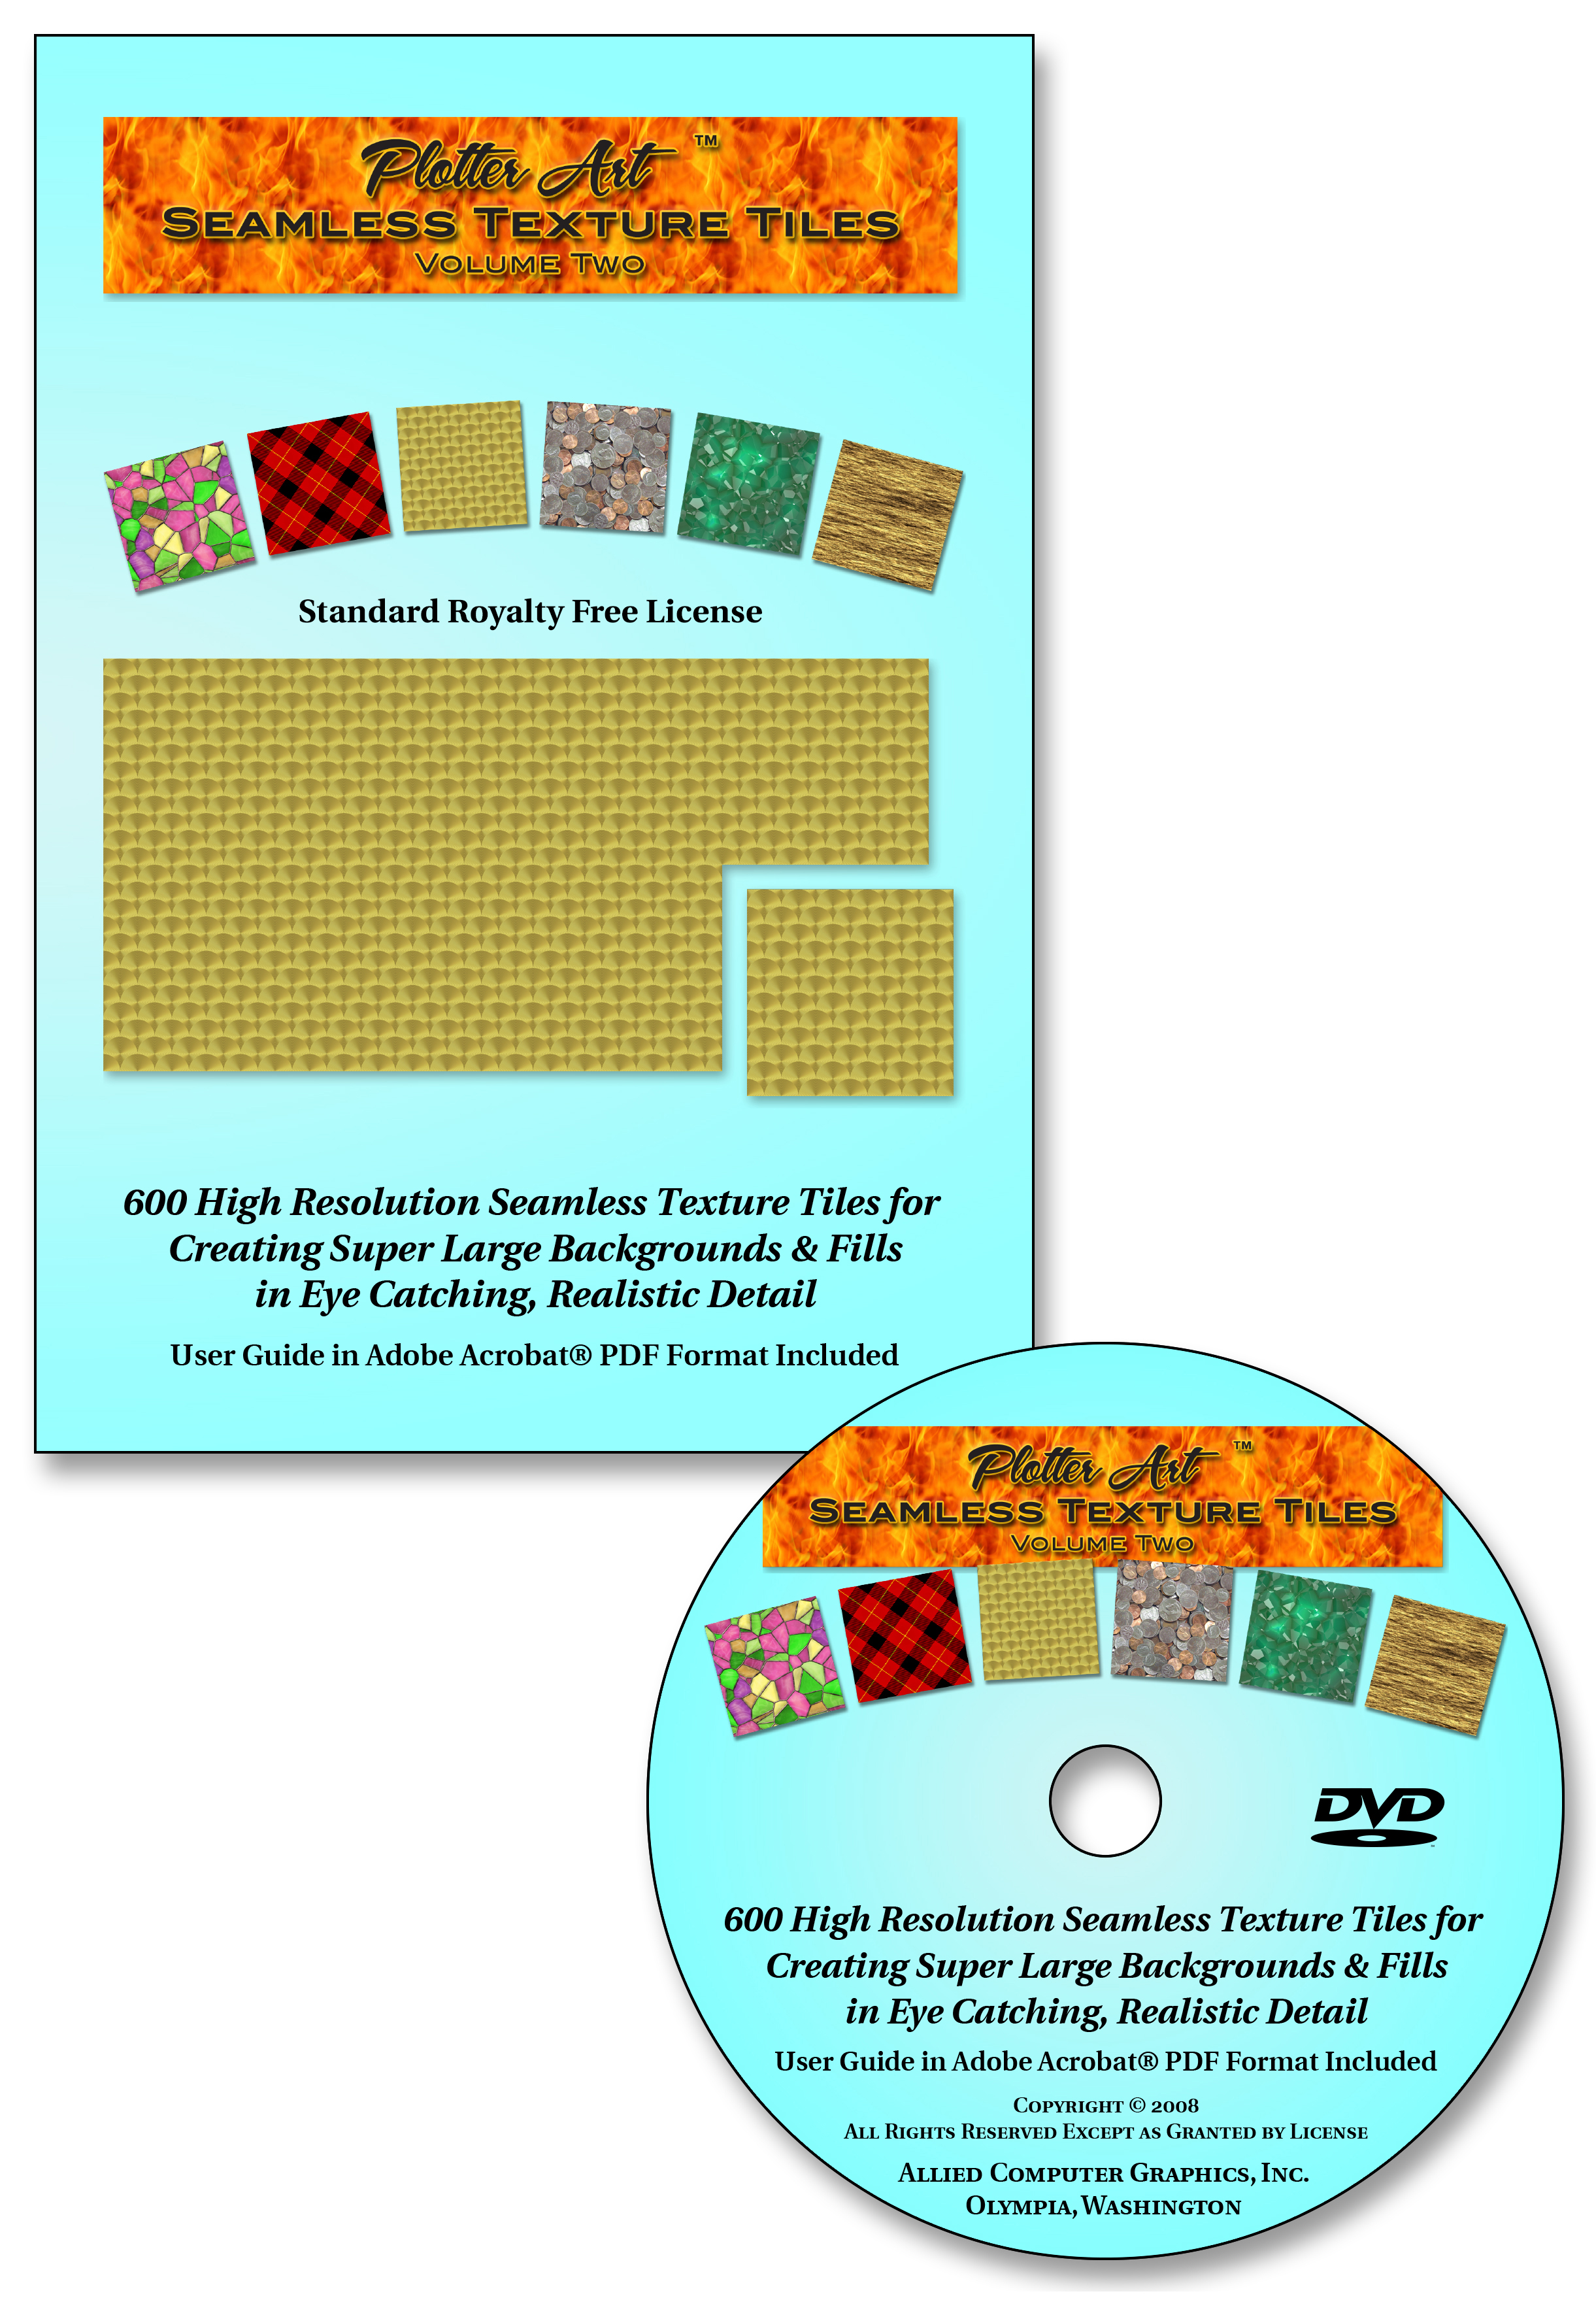 PASTT 2SL Cover Front with DVD.jpg